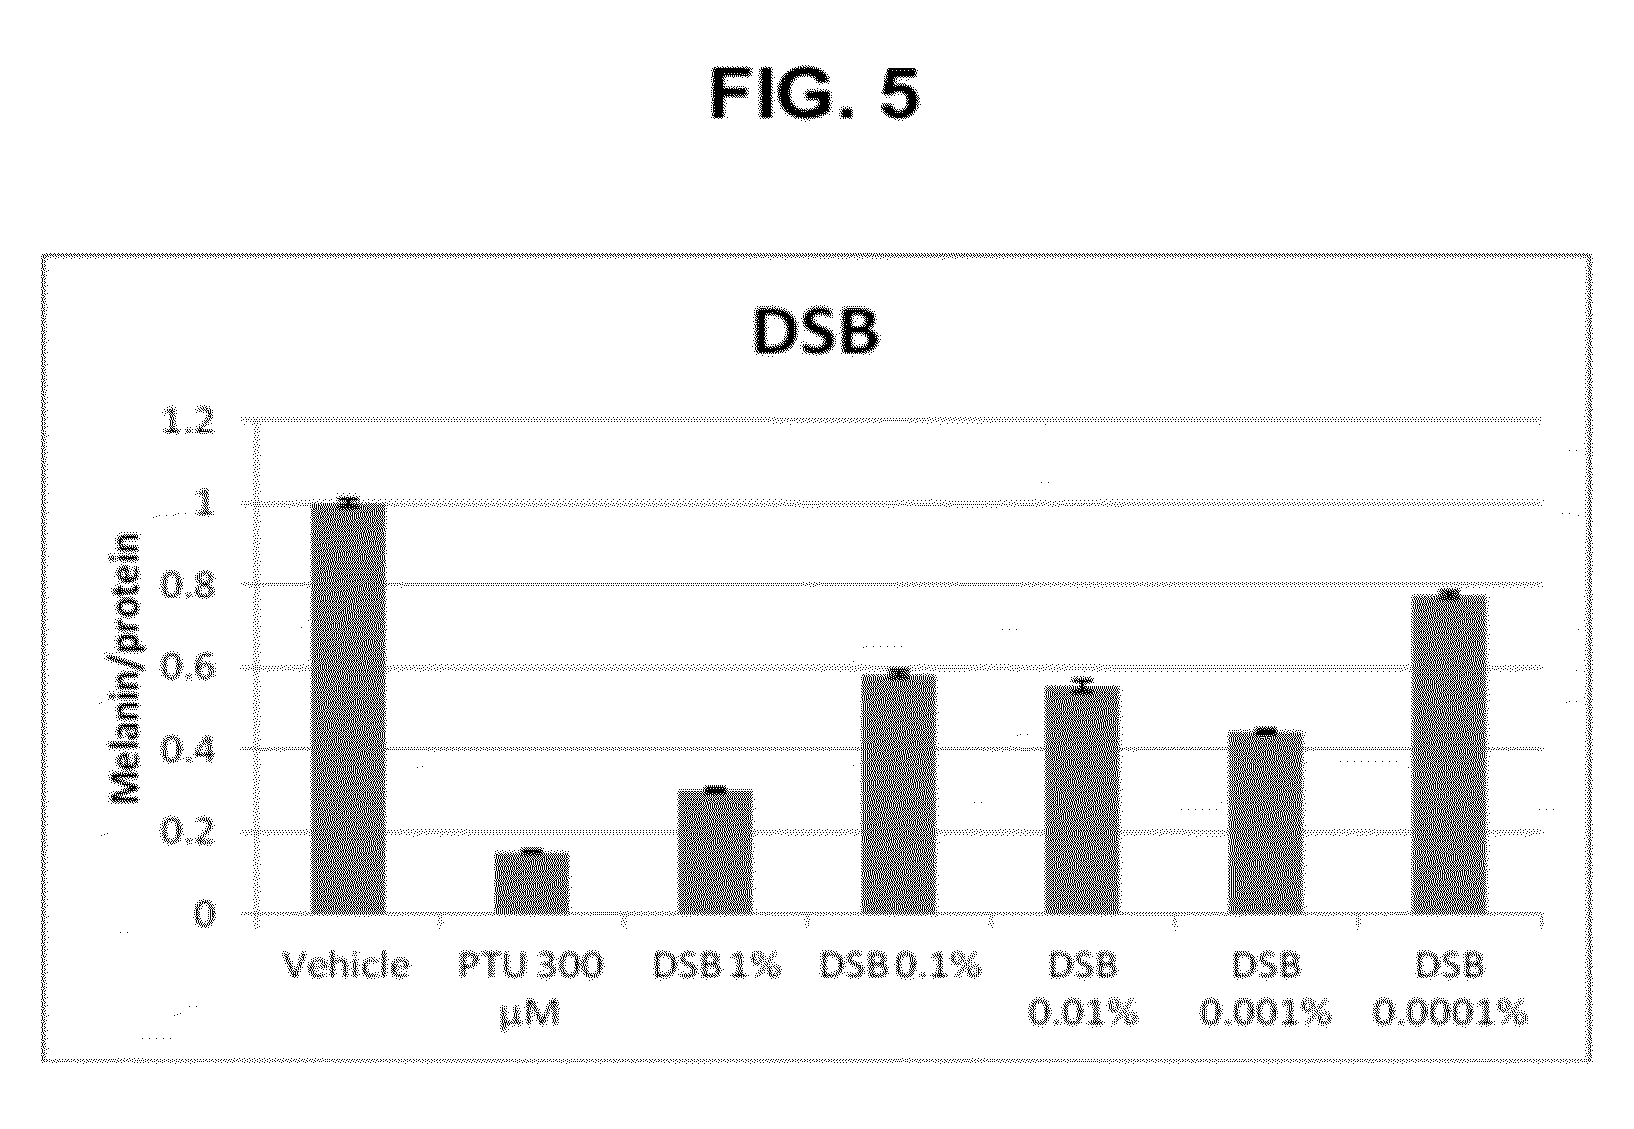 Coumarin compounds as melanogenesis modifiers and uses thereof